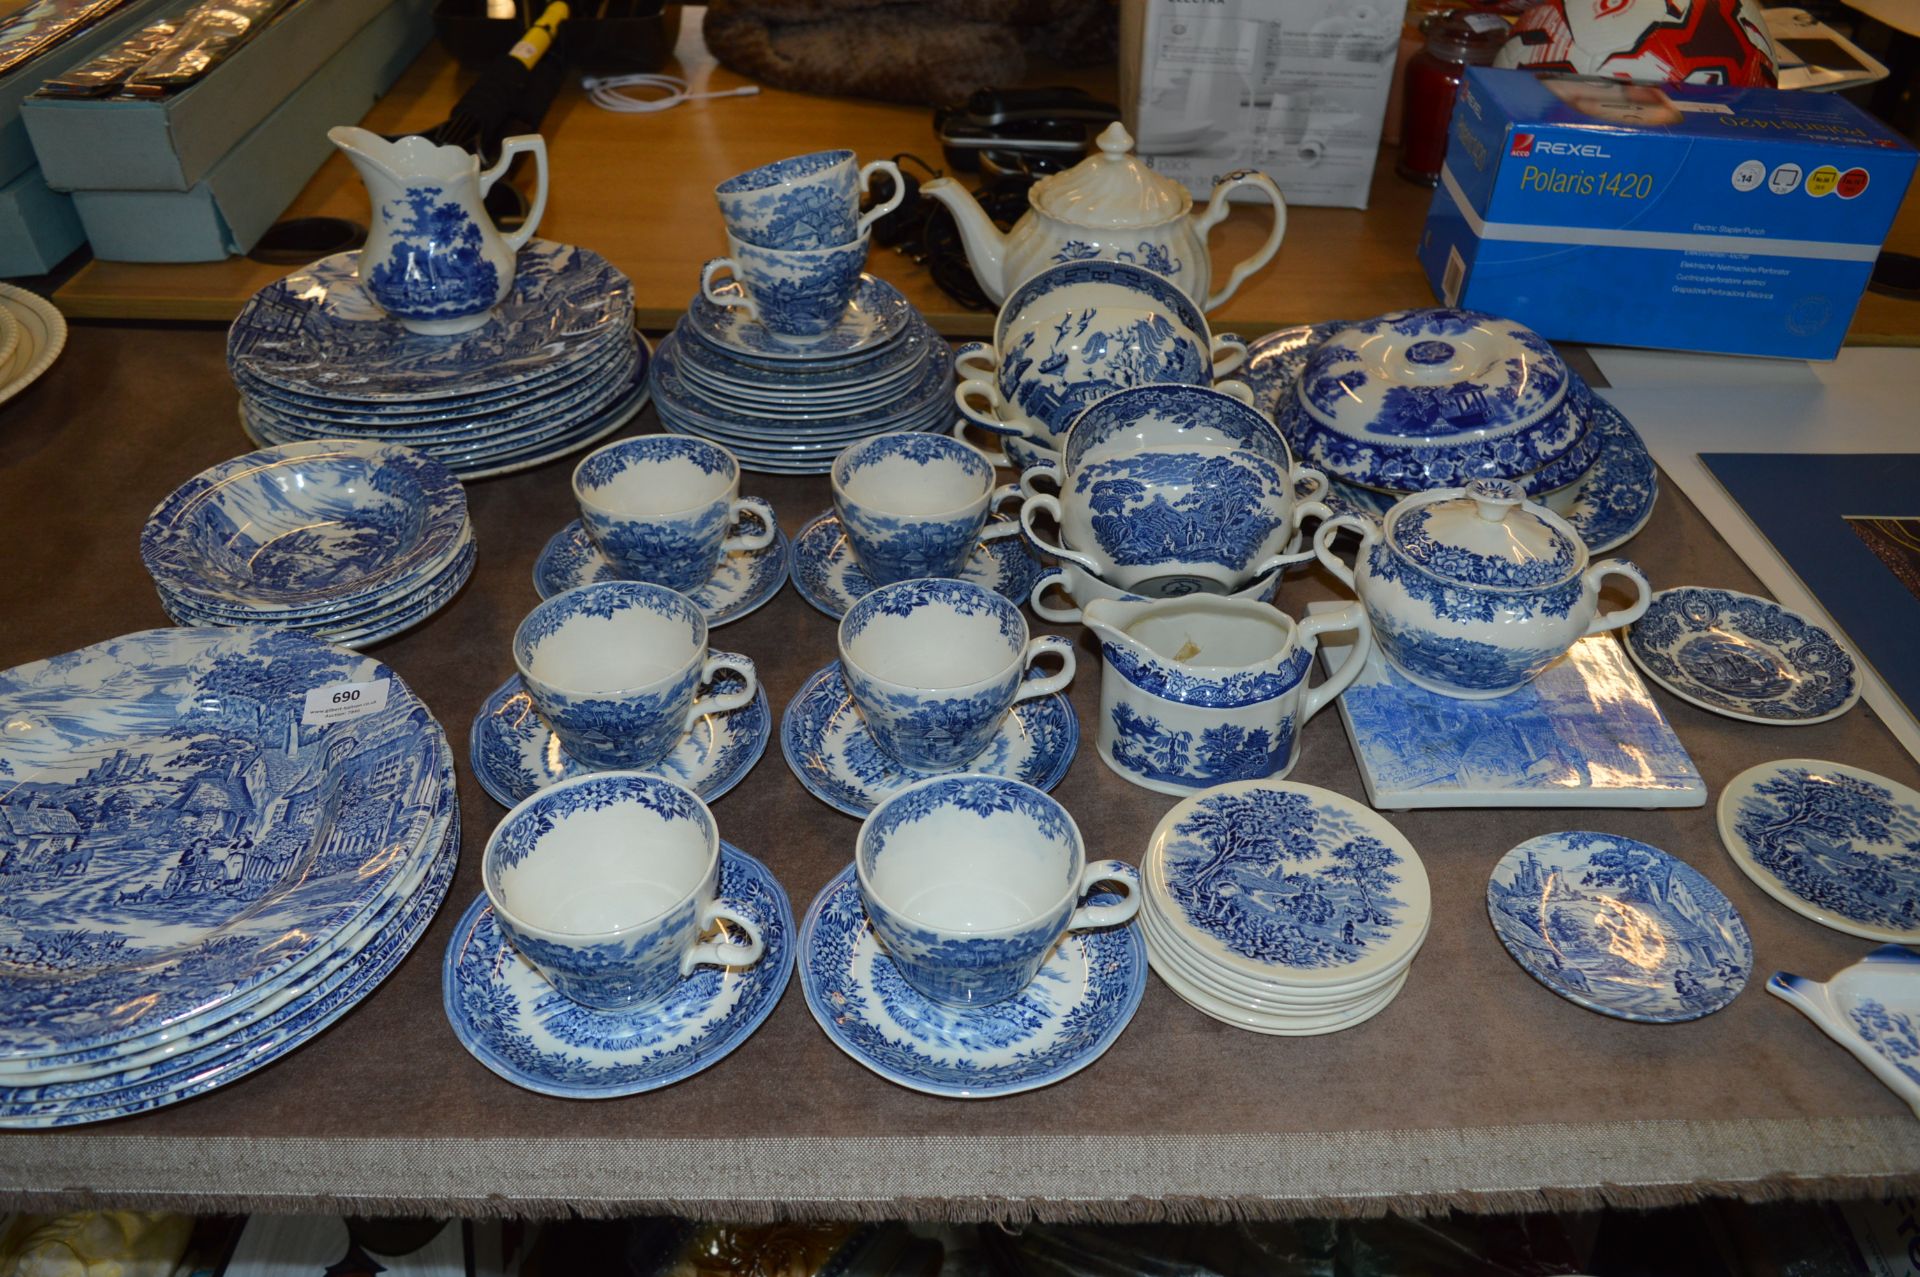 Large Quantity of Blue & White Dinnerware and a Tea Set